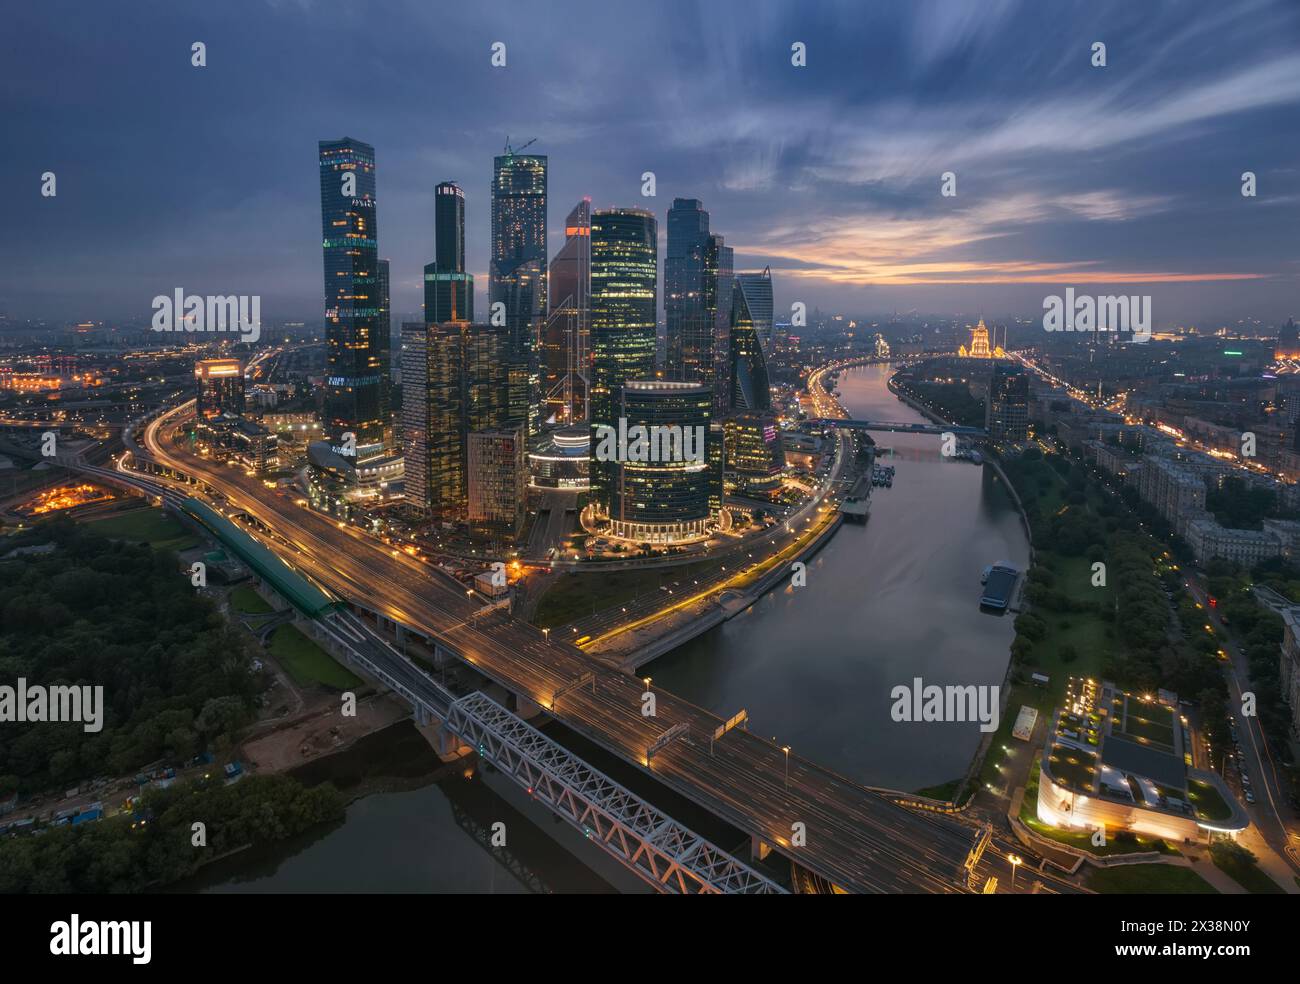 MOSCOW, RUSSIA - AUG 3, 2016: Skyscrapers of Moscow City business complex at morning. Moscow International Business Center Moscow City includes 20 fut Stock Photo